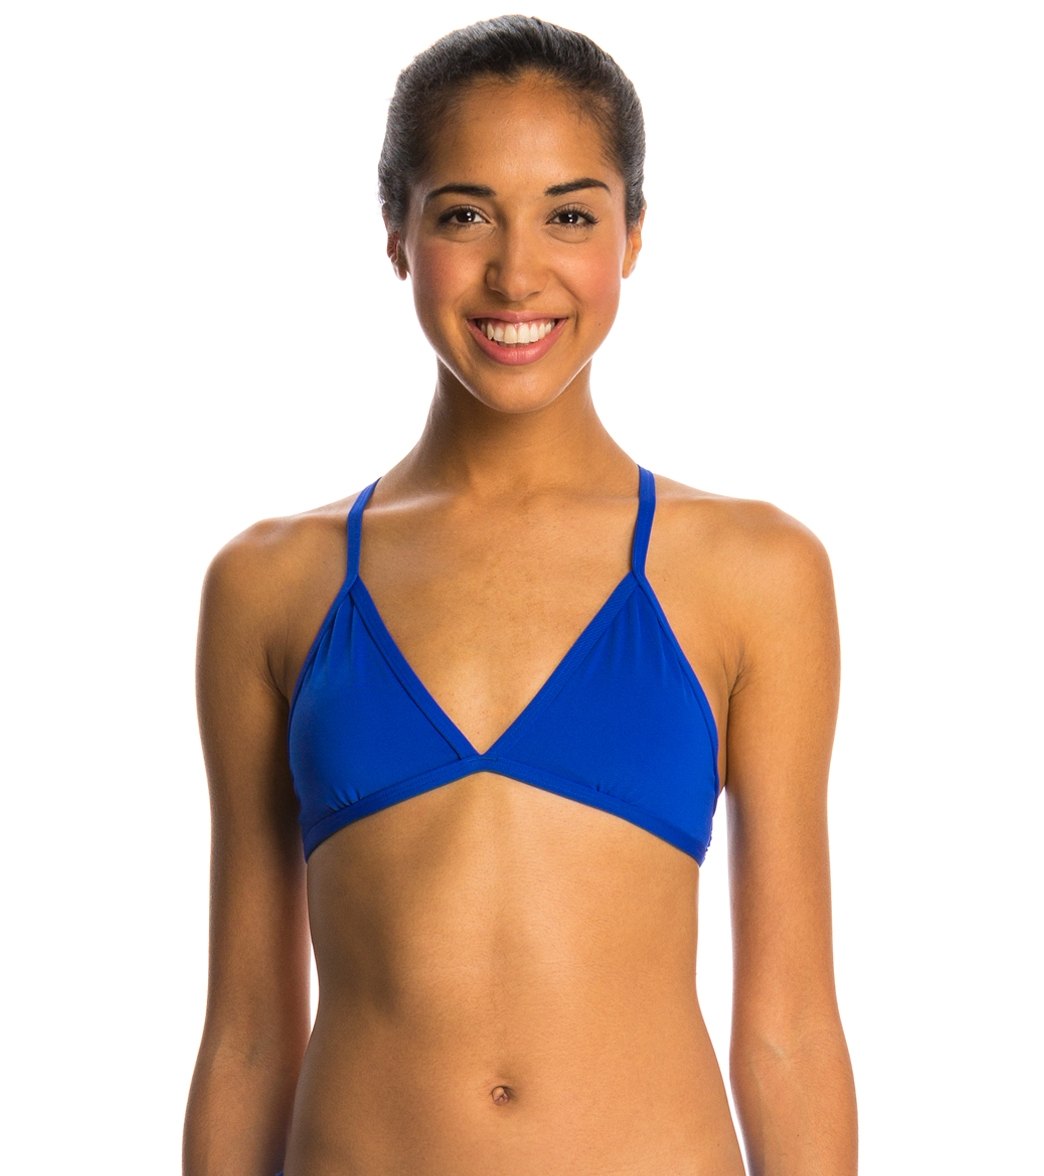 Women's Competition Two Piece Swimsuits